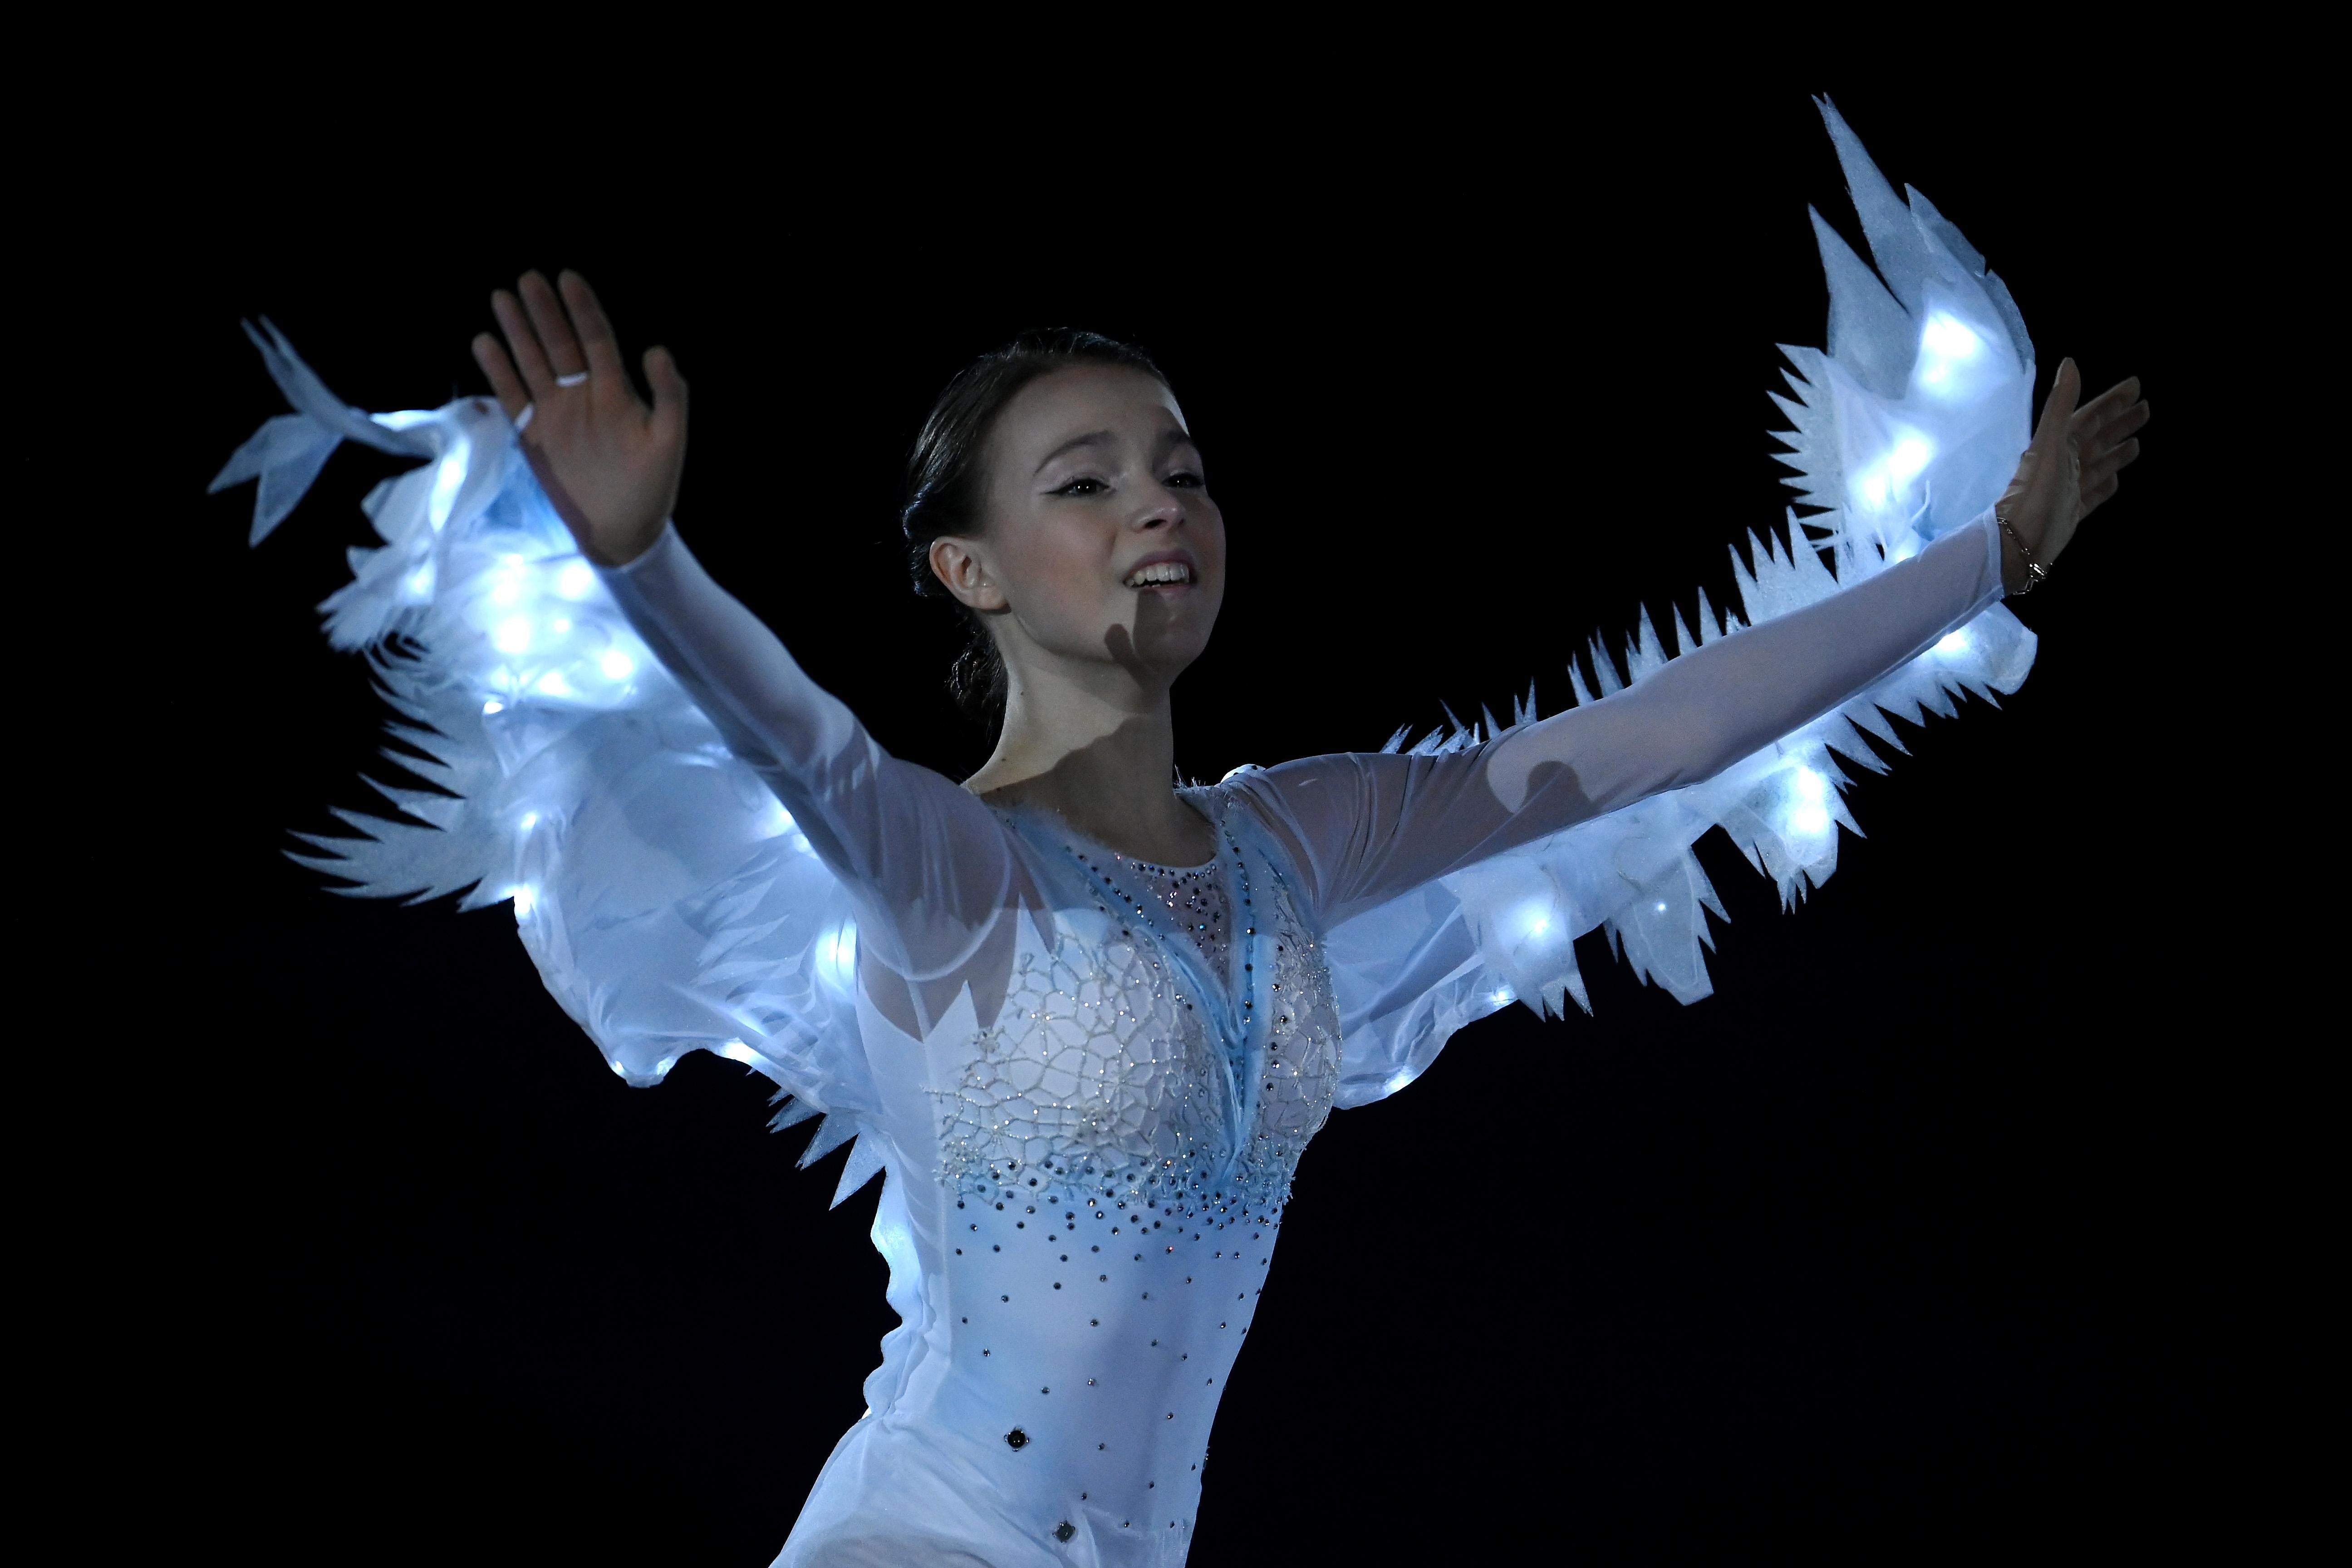 Shcherbakova in a glowing costume with arms featuring feathers, outstretched upward in front of her